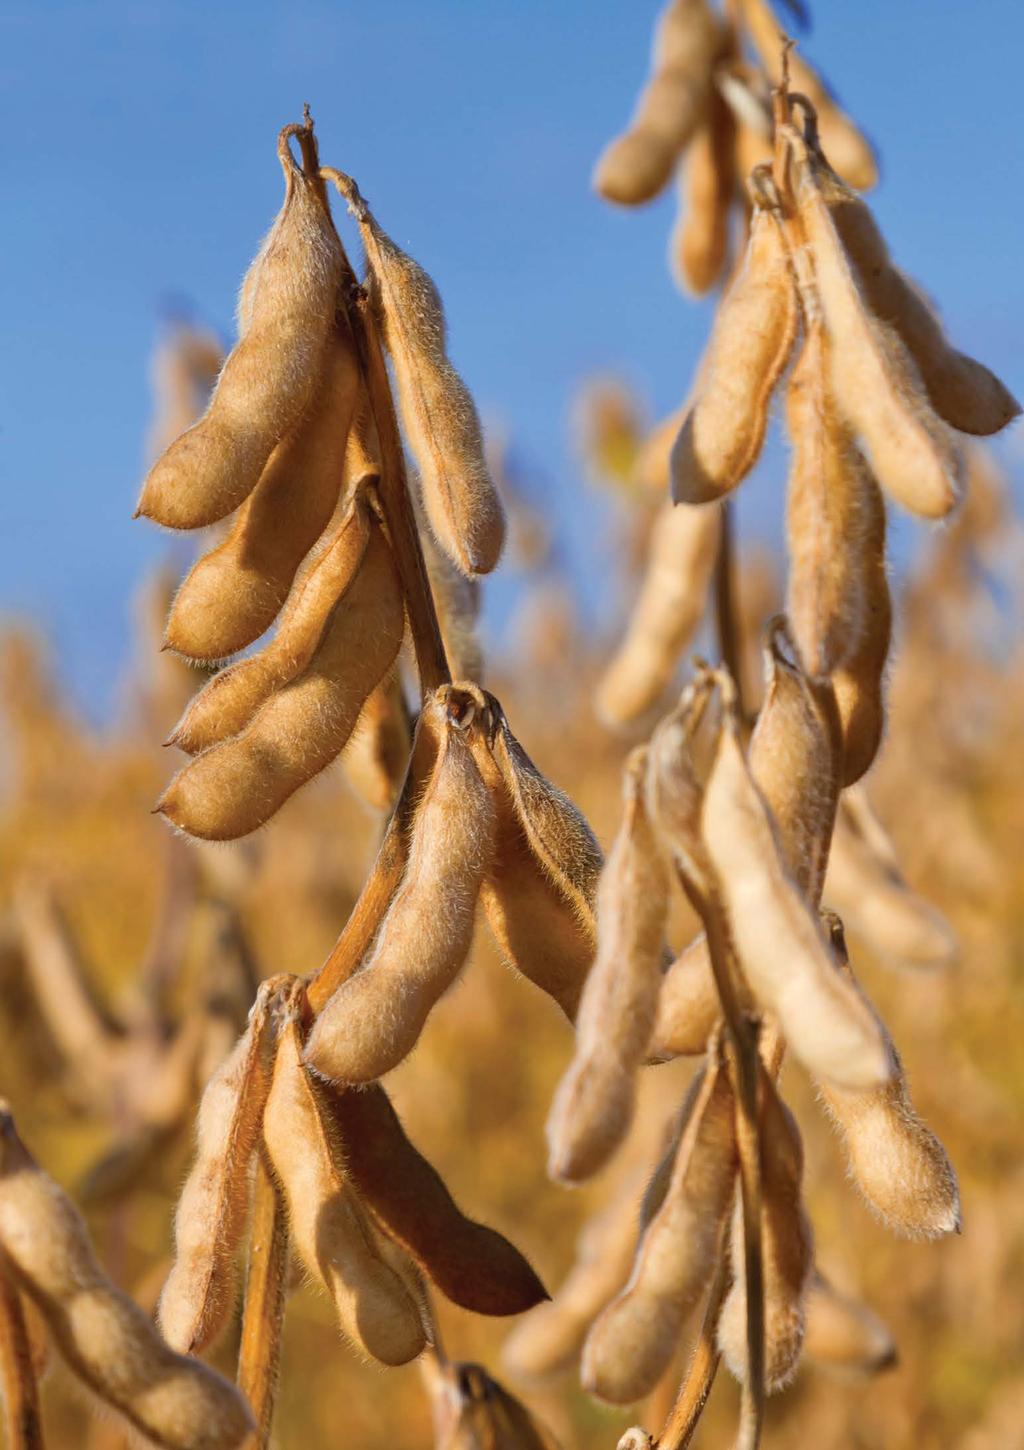 Image Soybeans ready